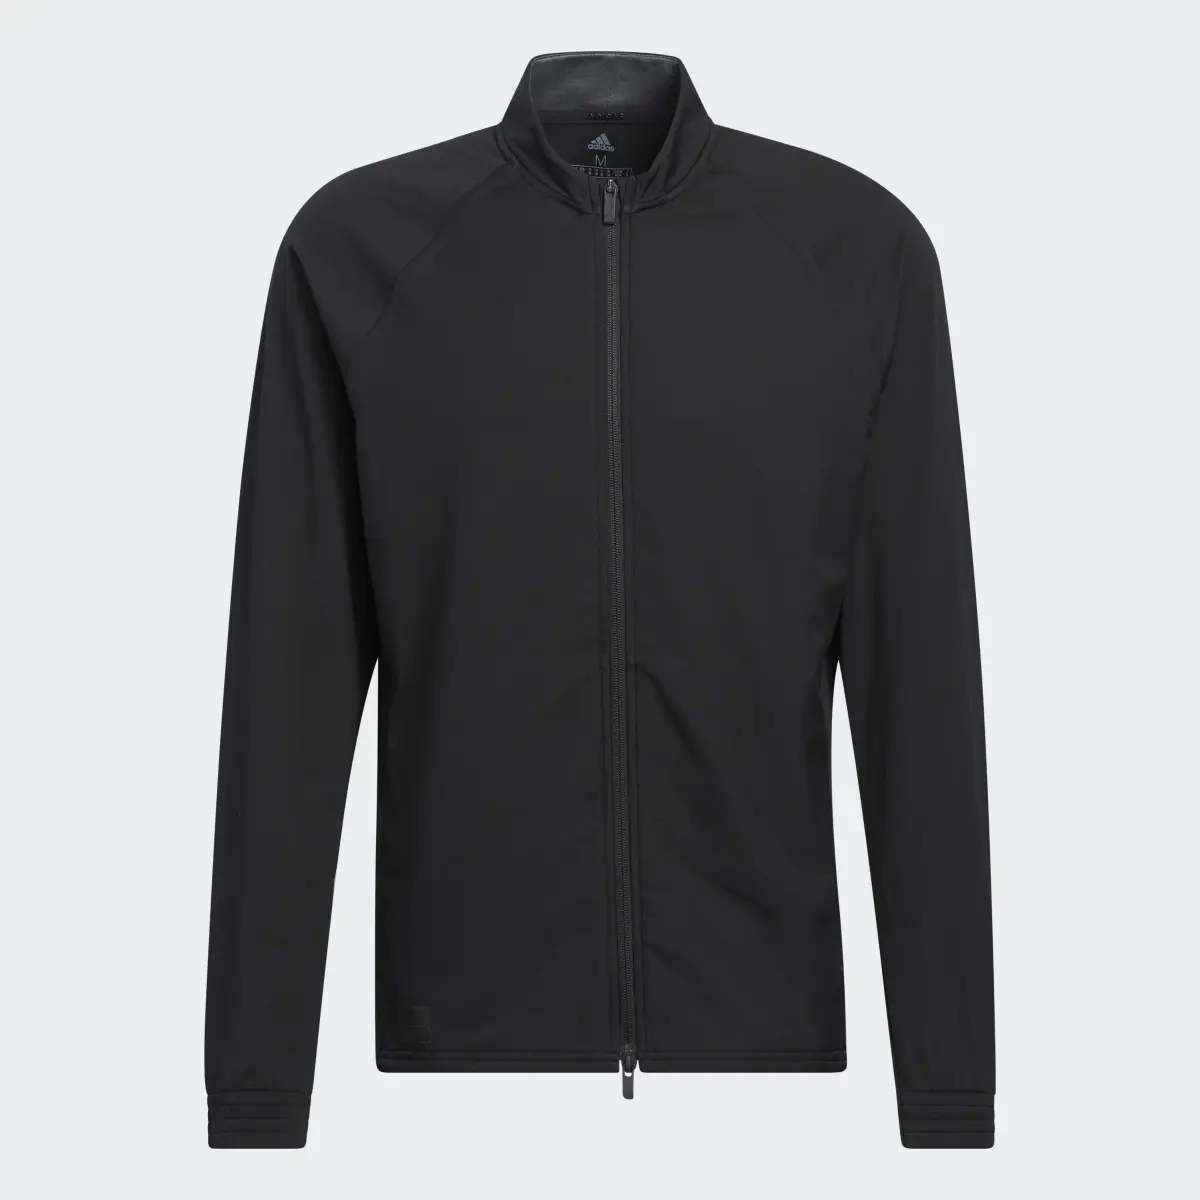 Adidas Go-To Recycled Materials Full-Zip Jacket. 1